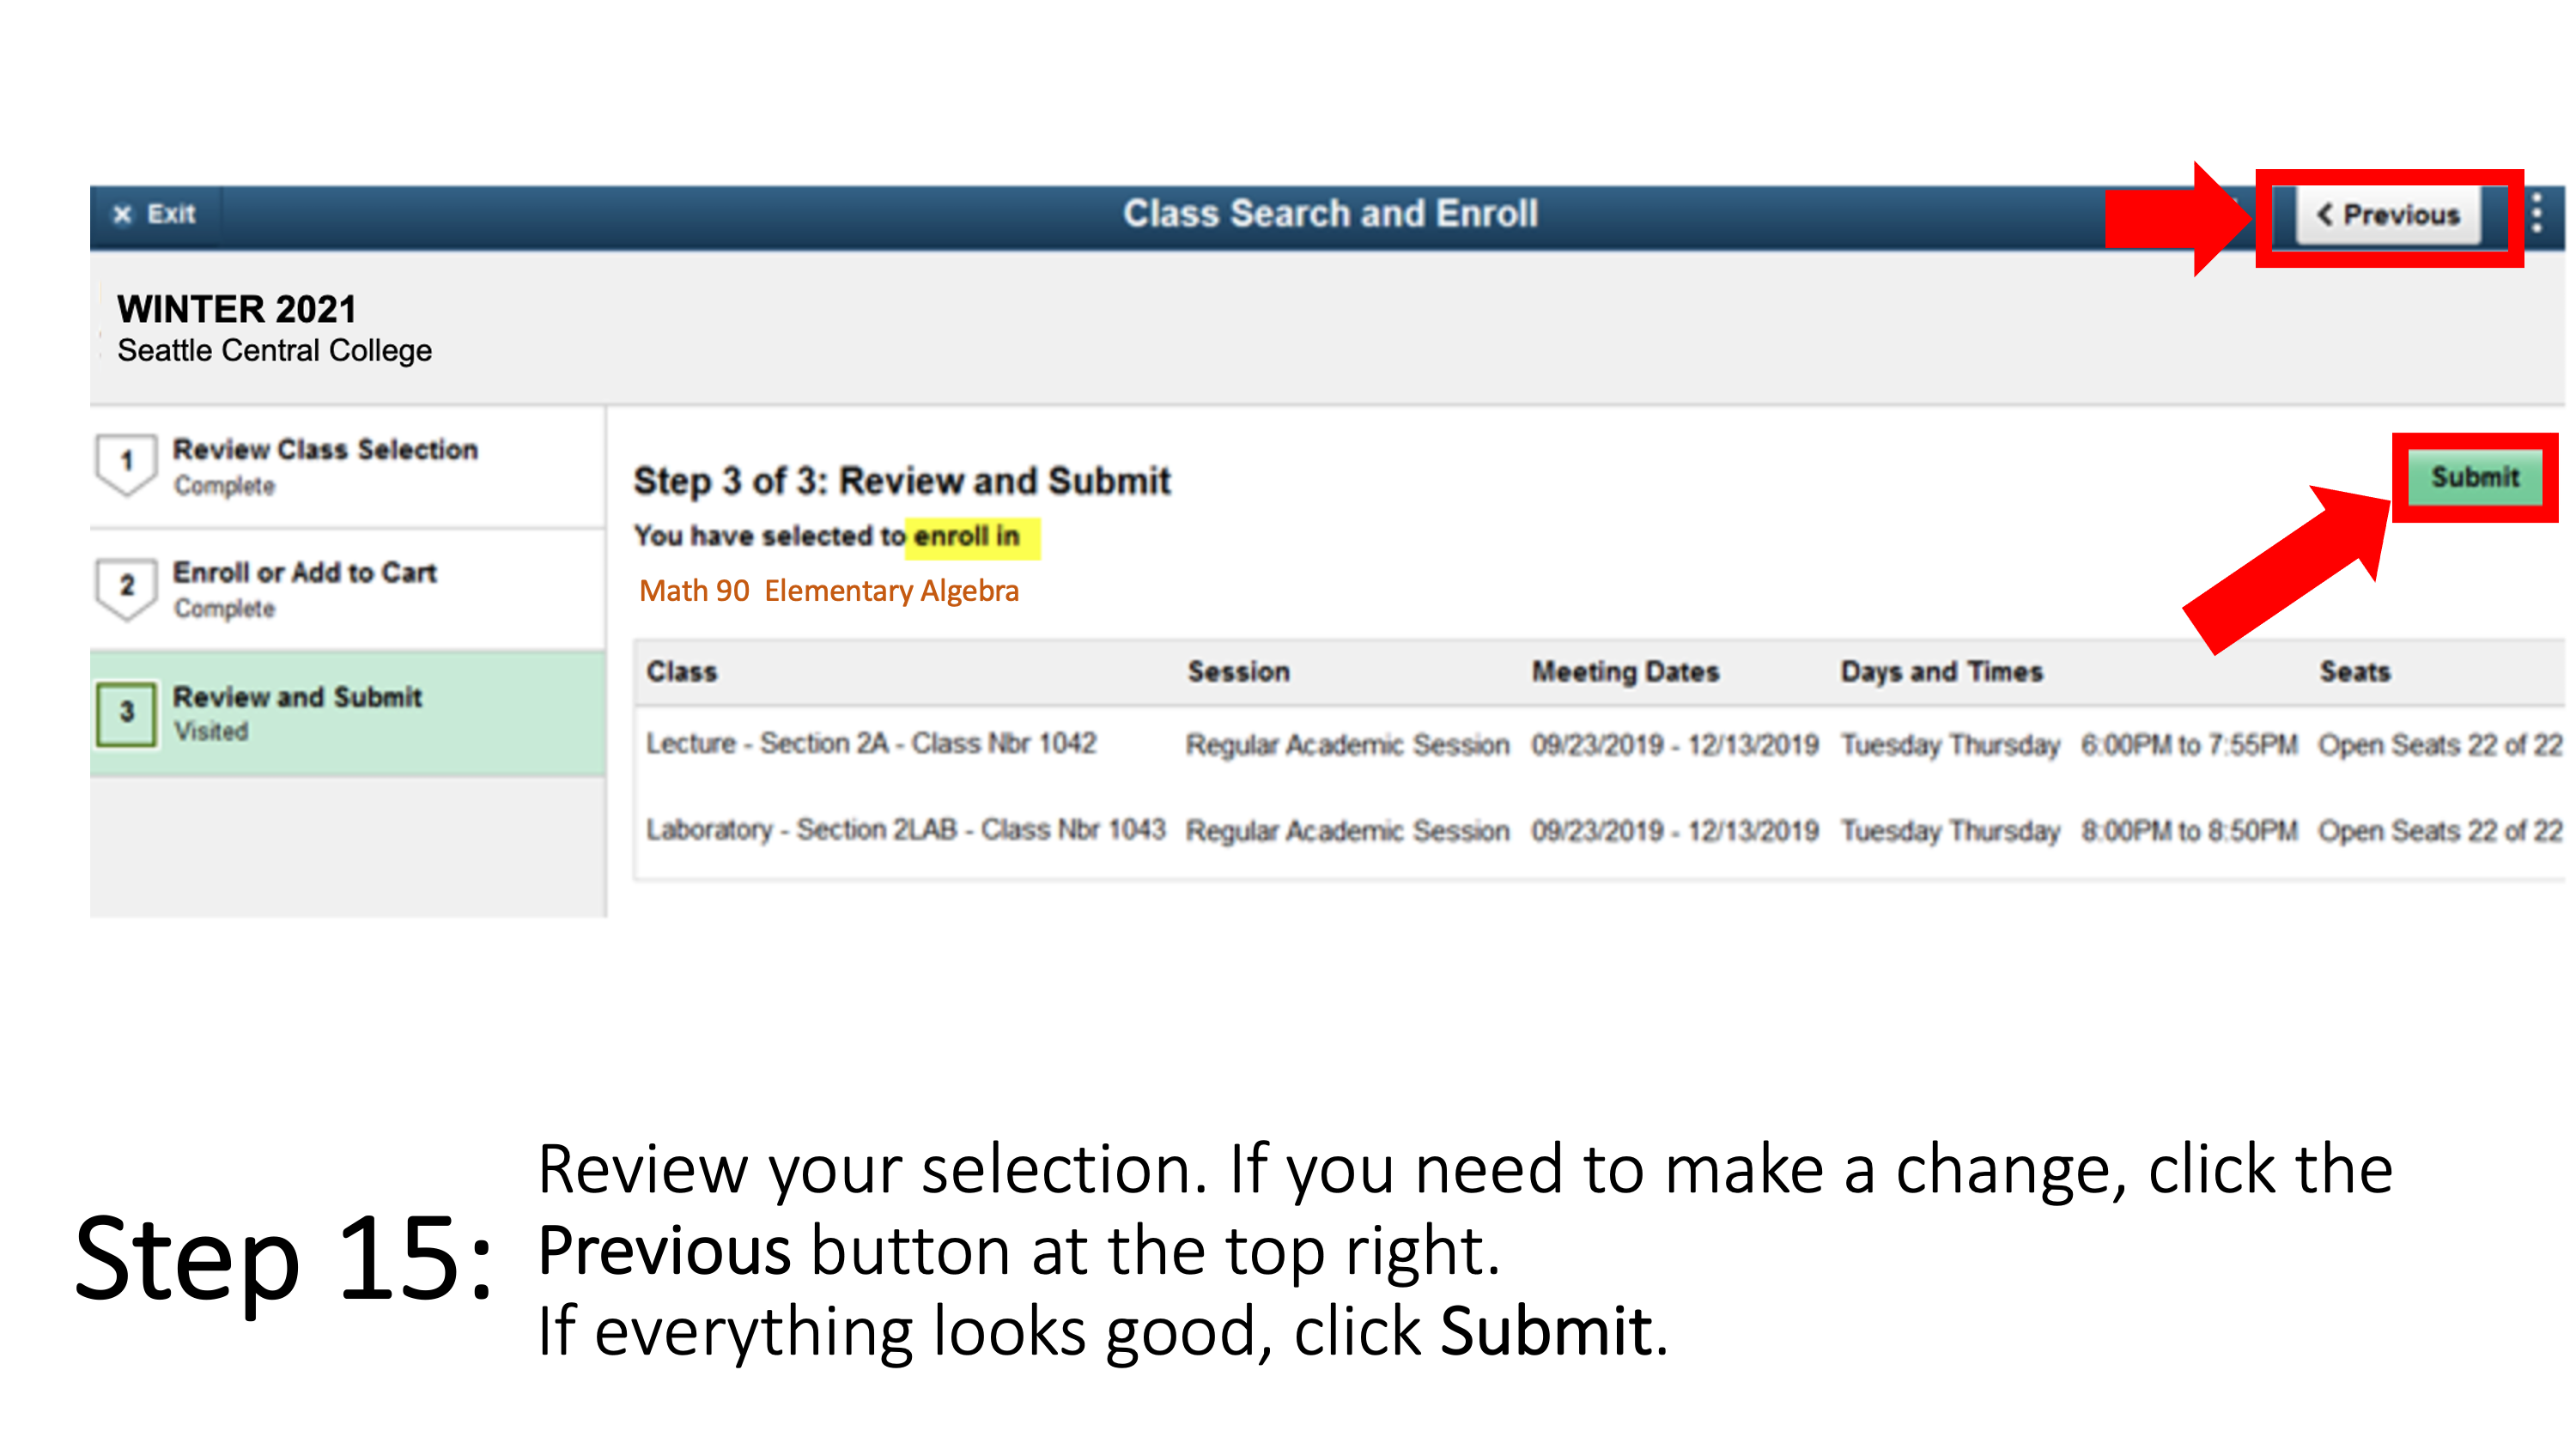 Review your selection. If you need to make a change, click the Previous button at the top right. If everything looks good, click Submit.